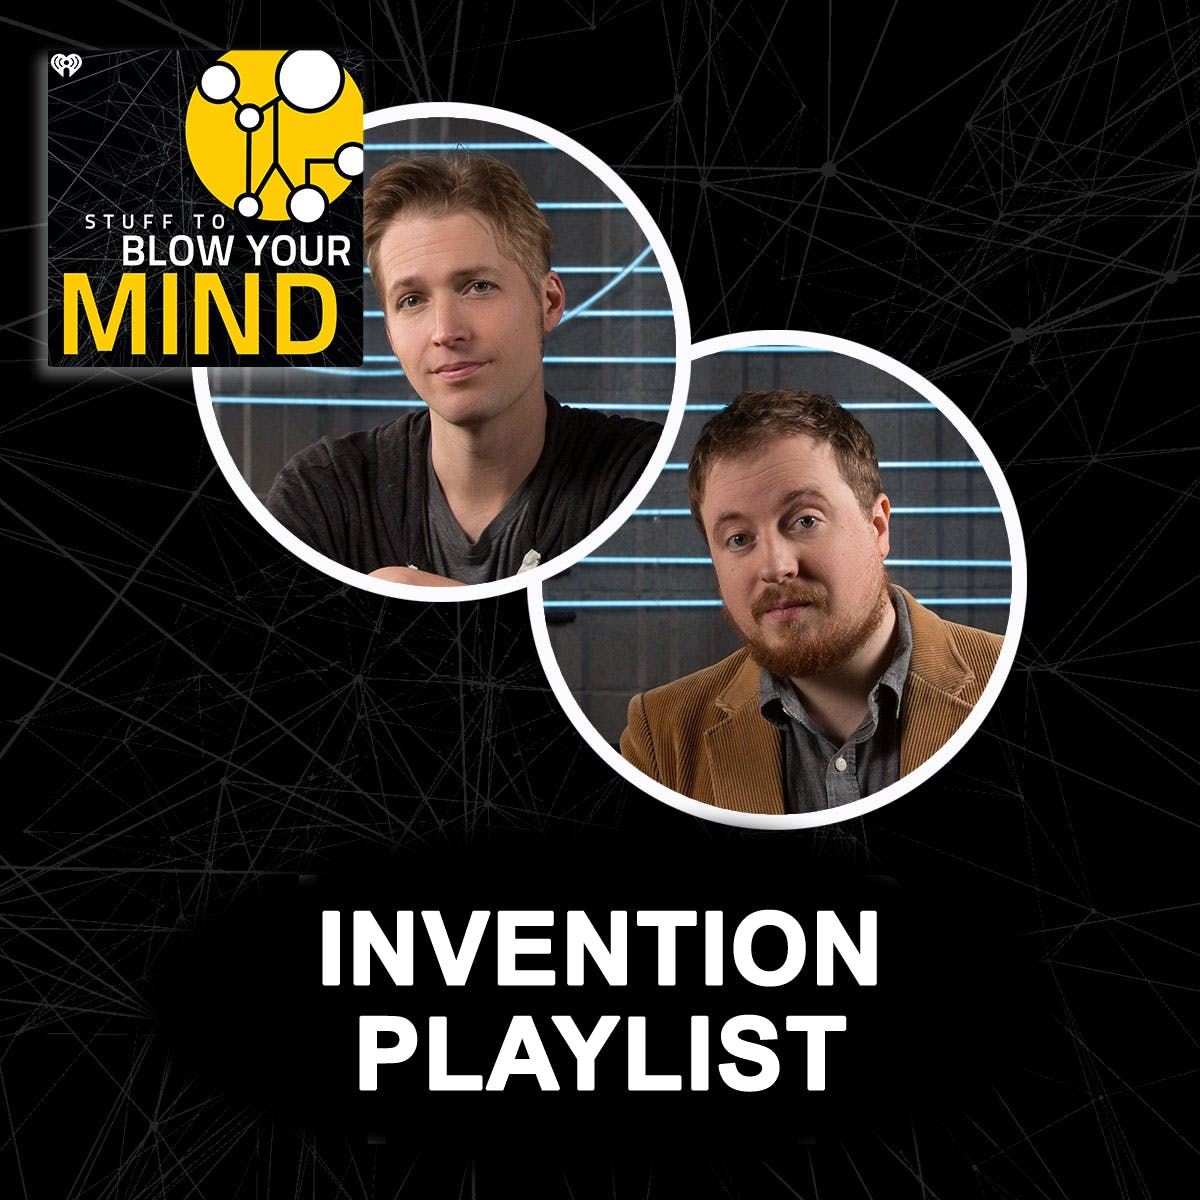 Invention Playlist: The Motion Picture, Part 2